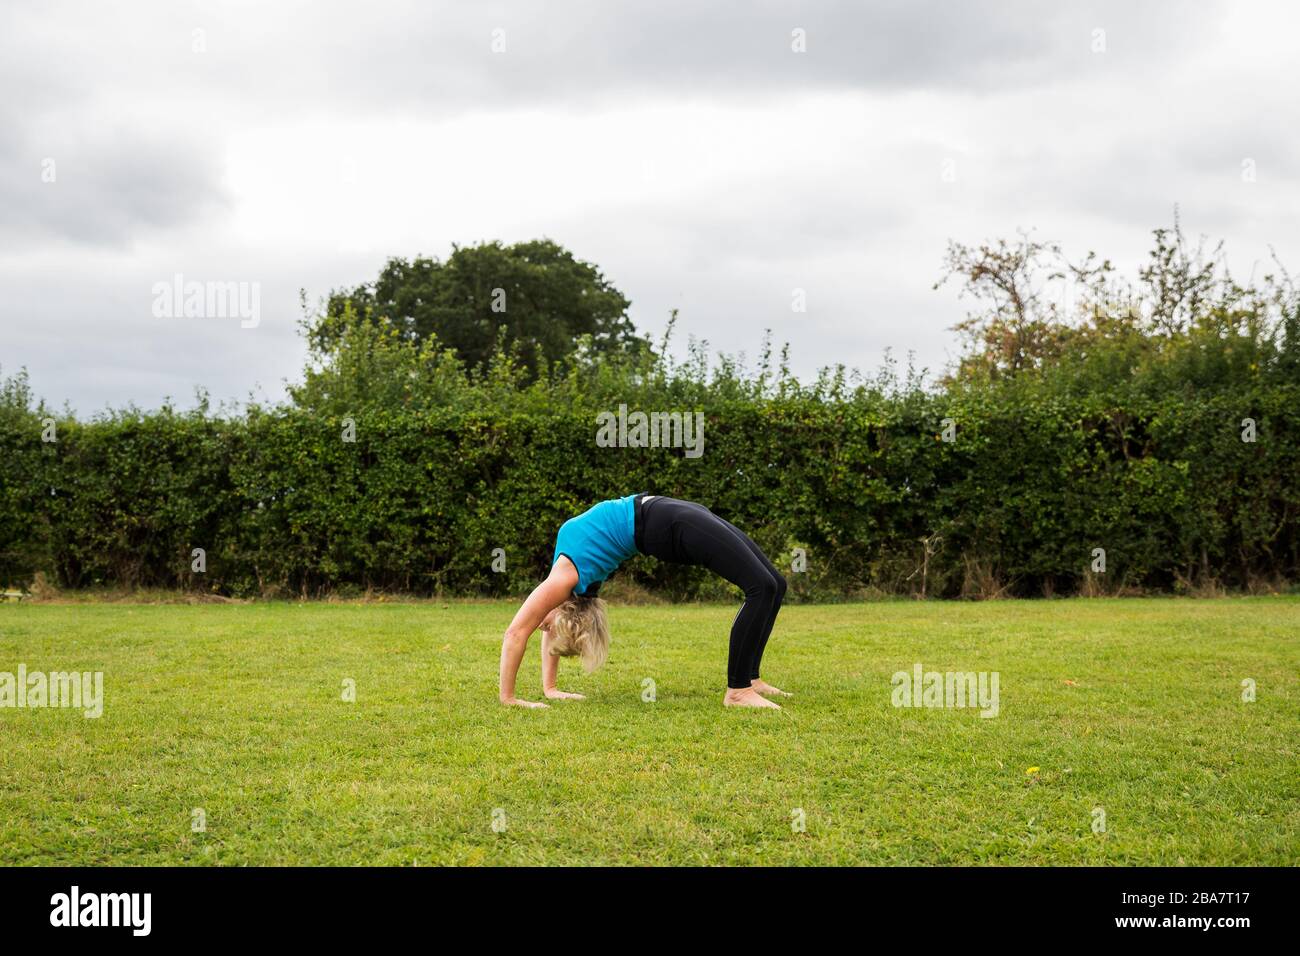 A middle aged woman practicing yoga barefoot outside in a grassy park. She is wearing a bright blue vest and black leggings. The style of yoga she is Stock Photo